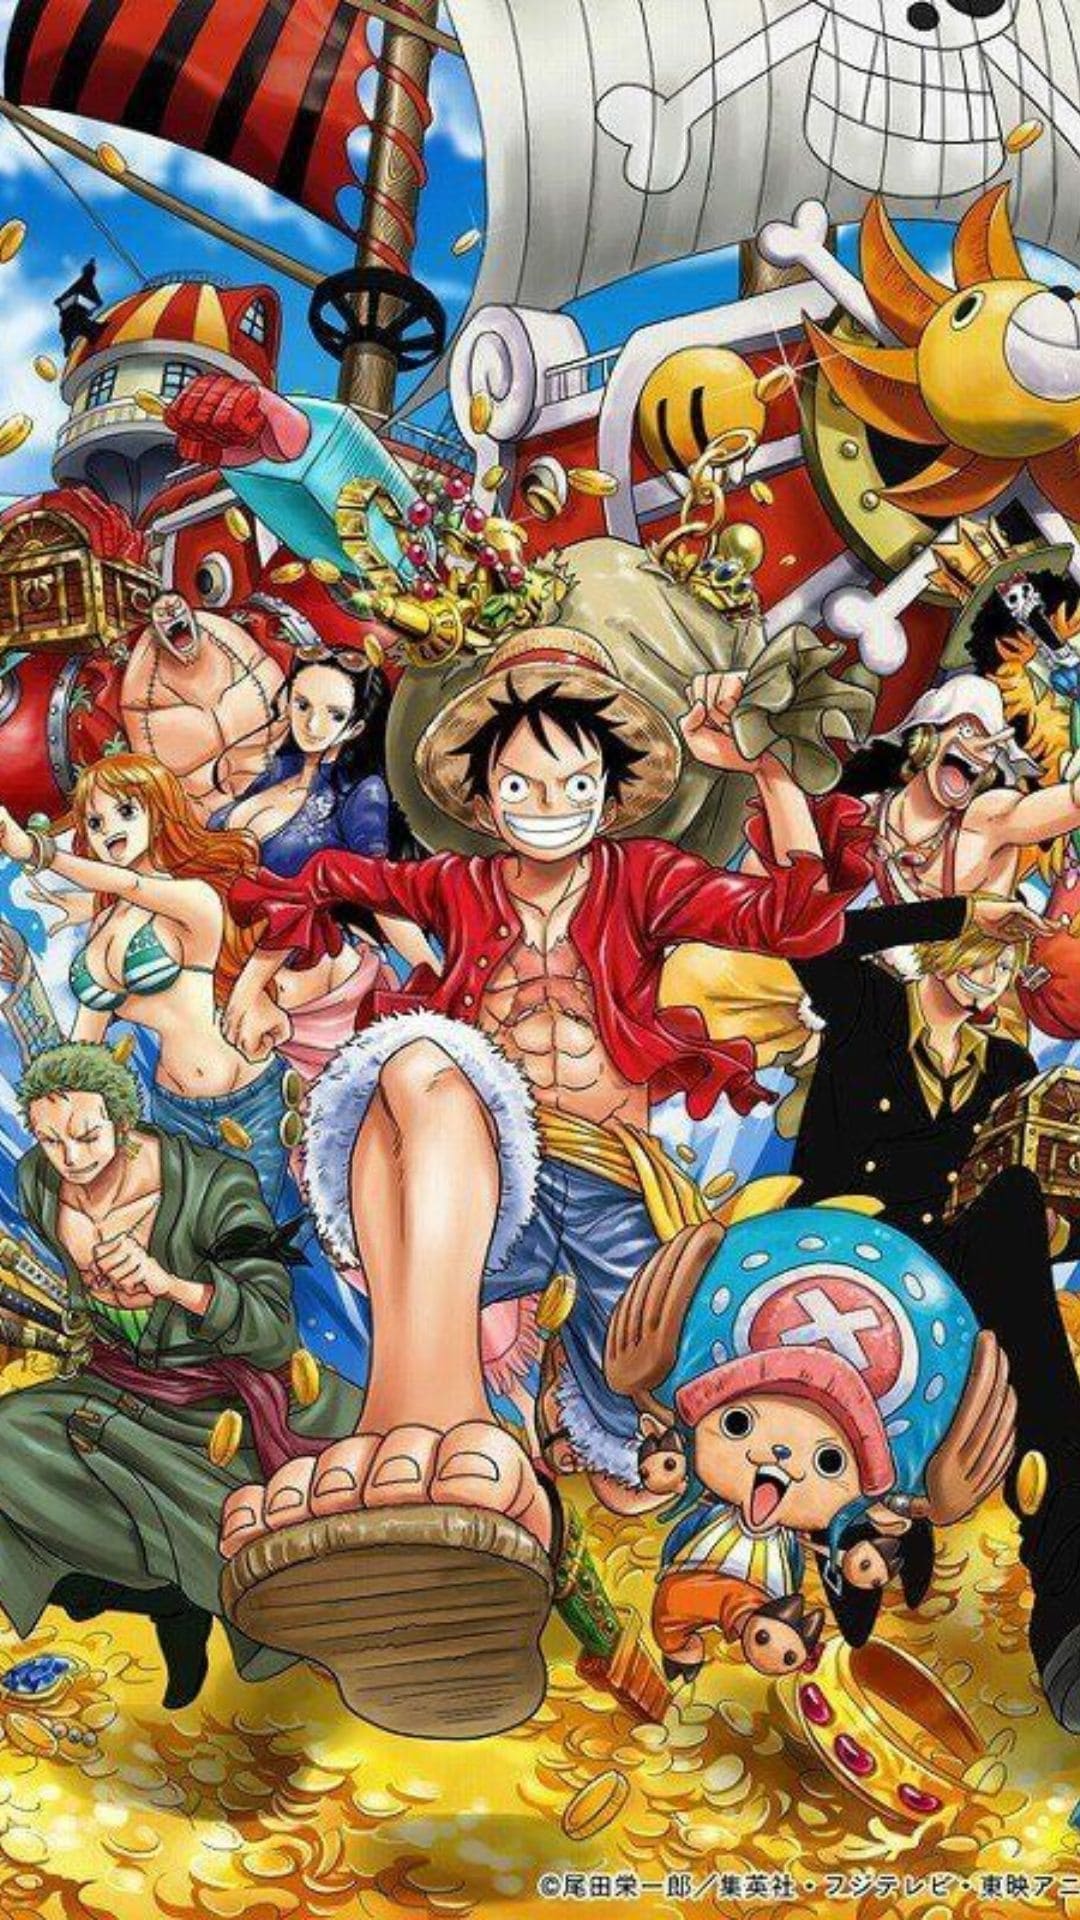 Best One Piece iPhone Wallpapers - Wallpaper Cave.